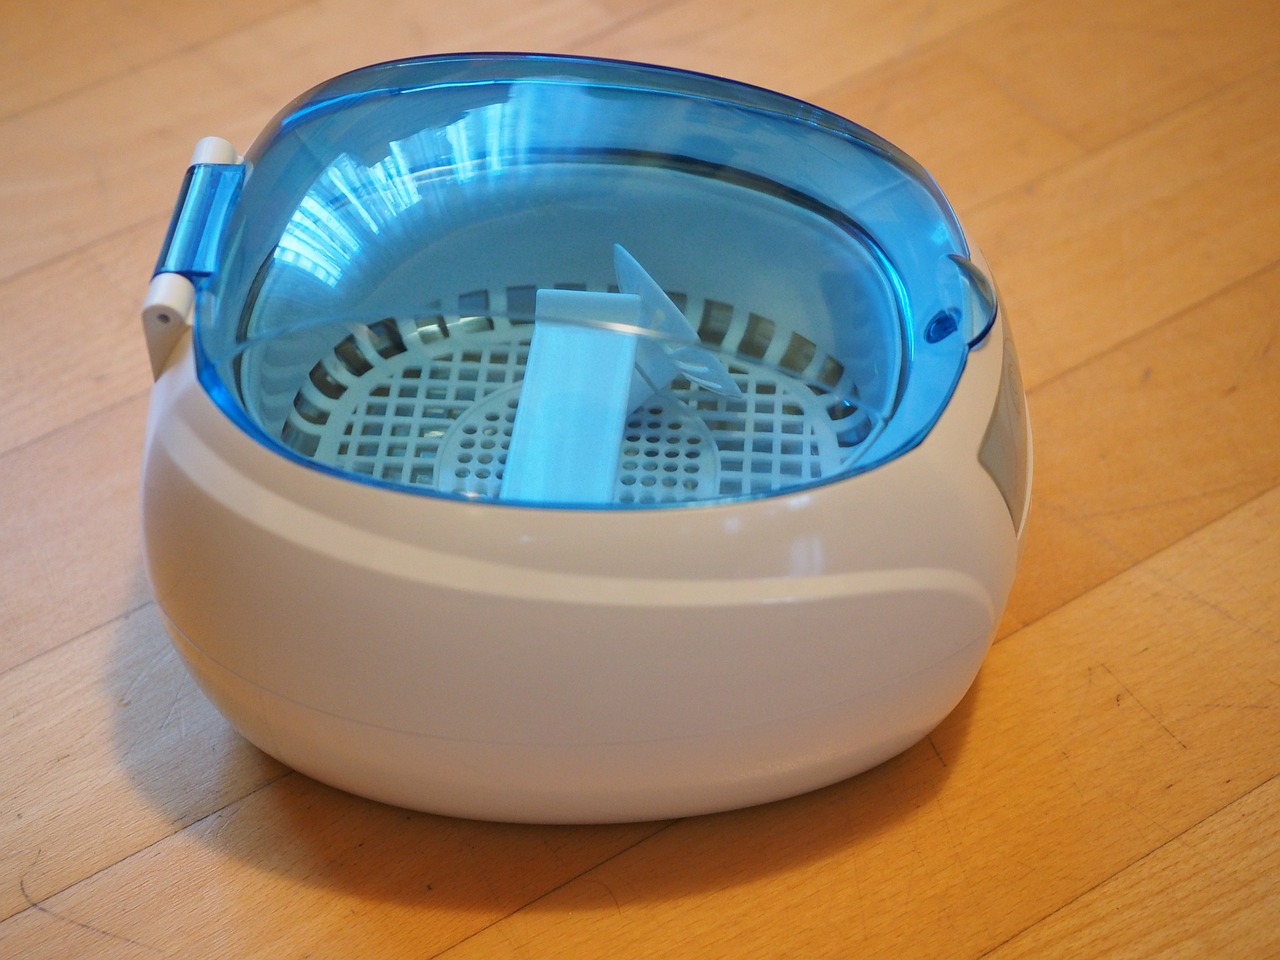 ultrasonic cleaner devices cleaning device free photo